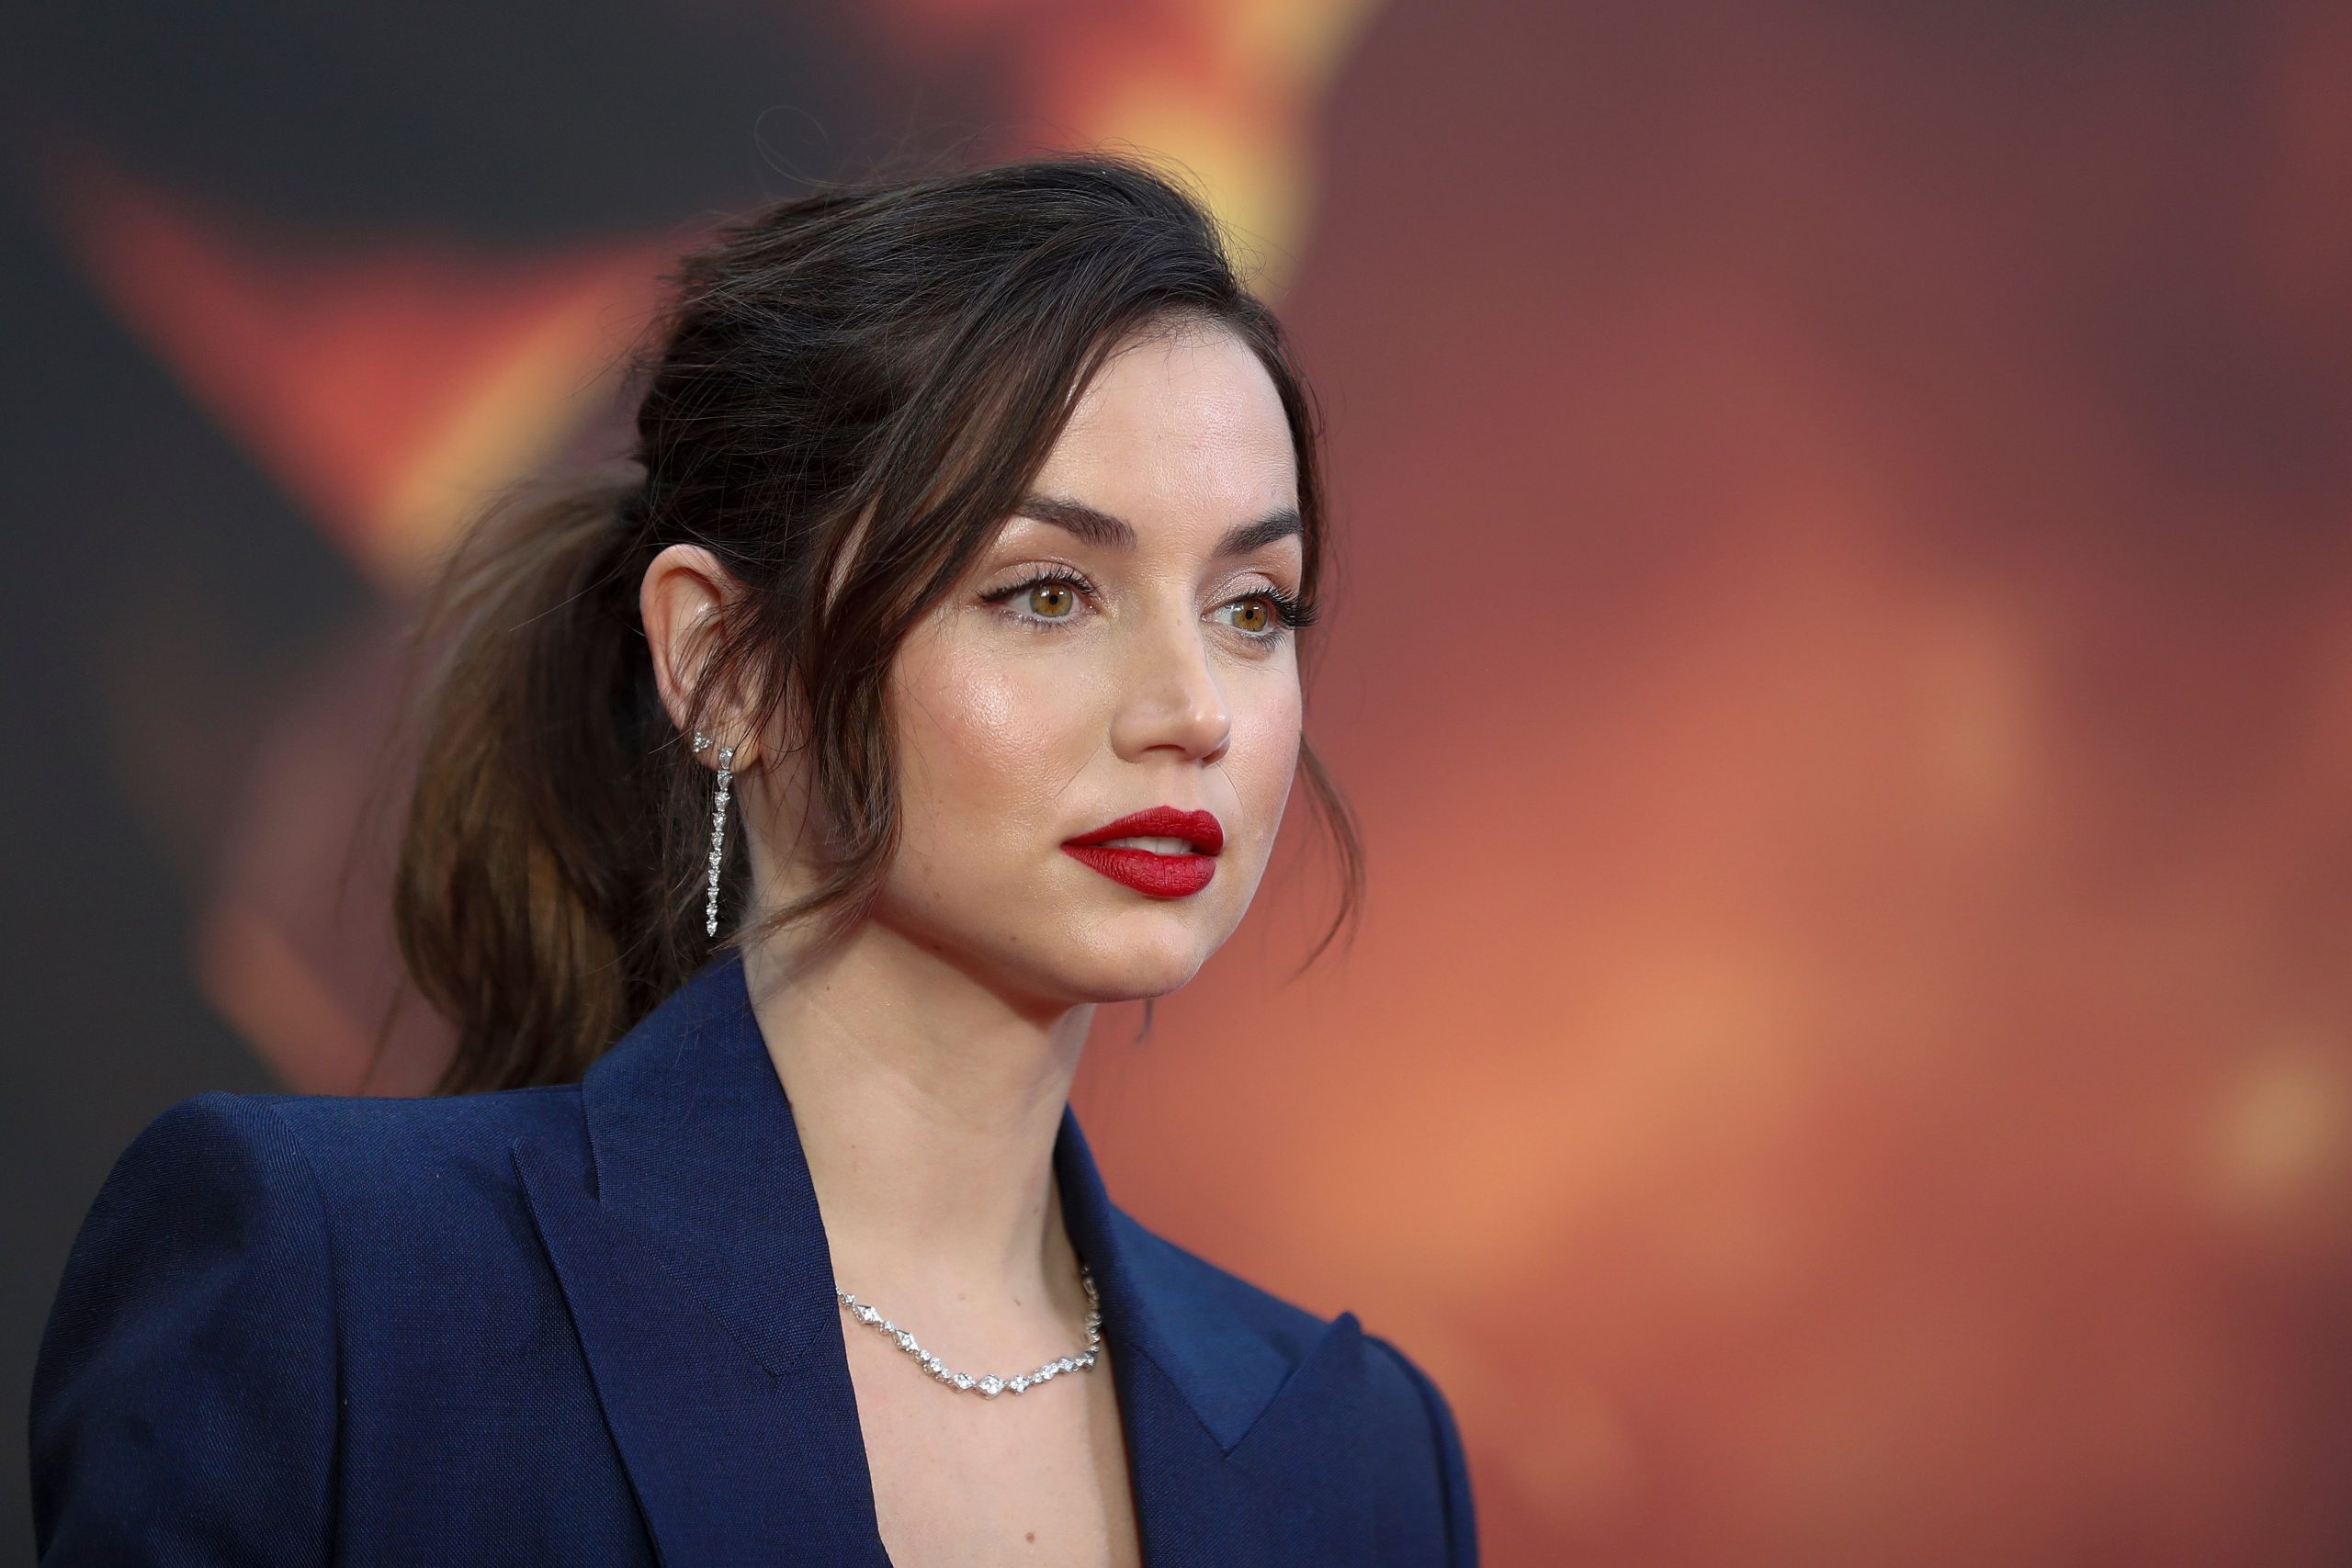 Here's Everything We Know About Ana de Armas, the New Bond Girl